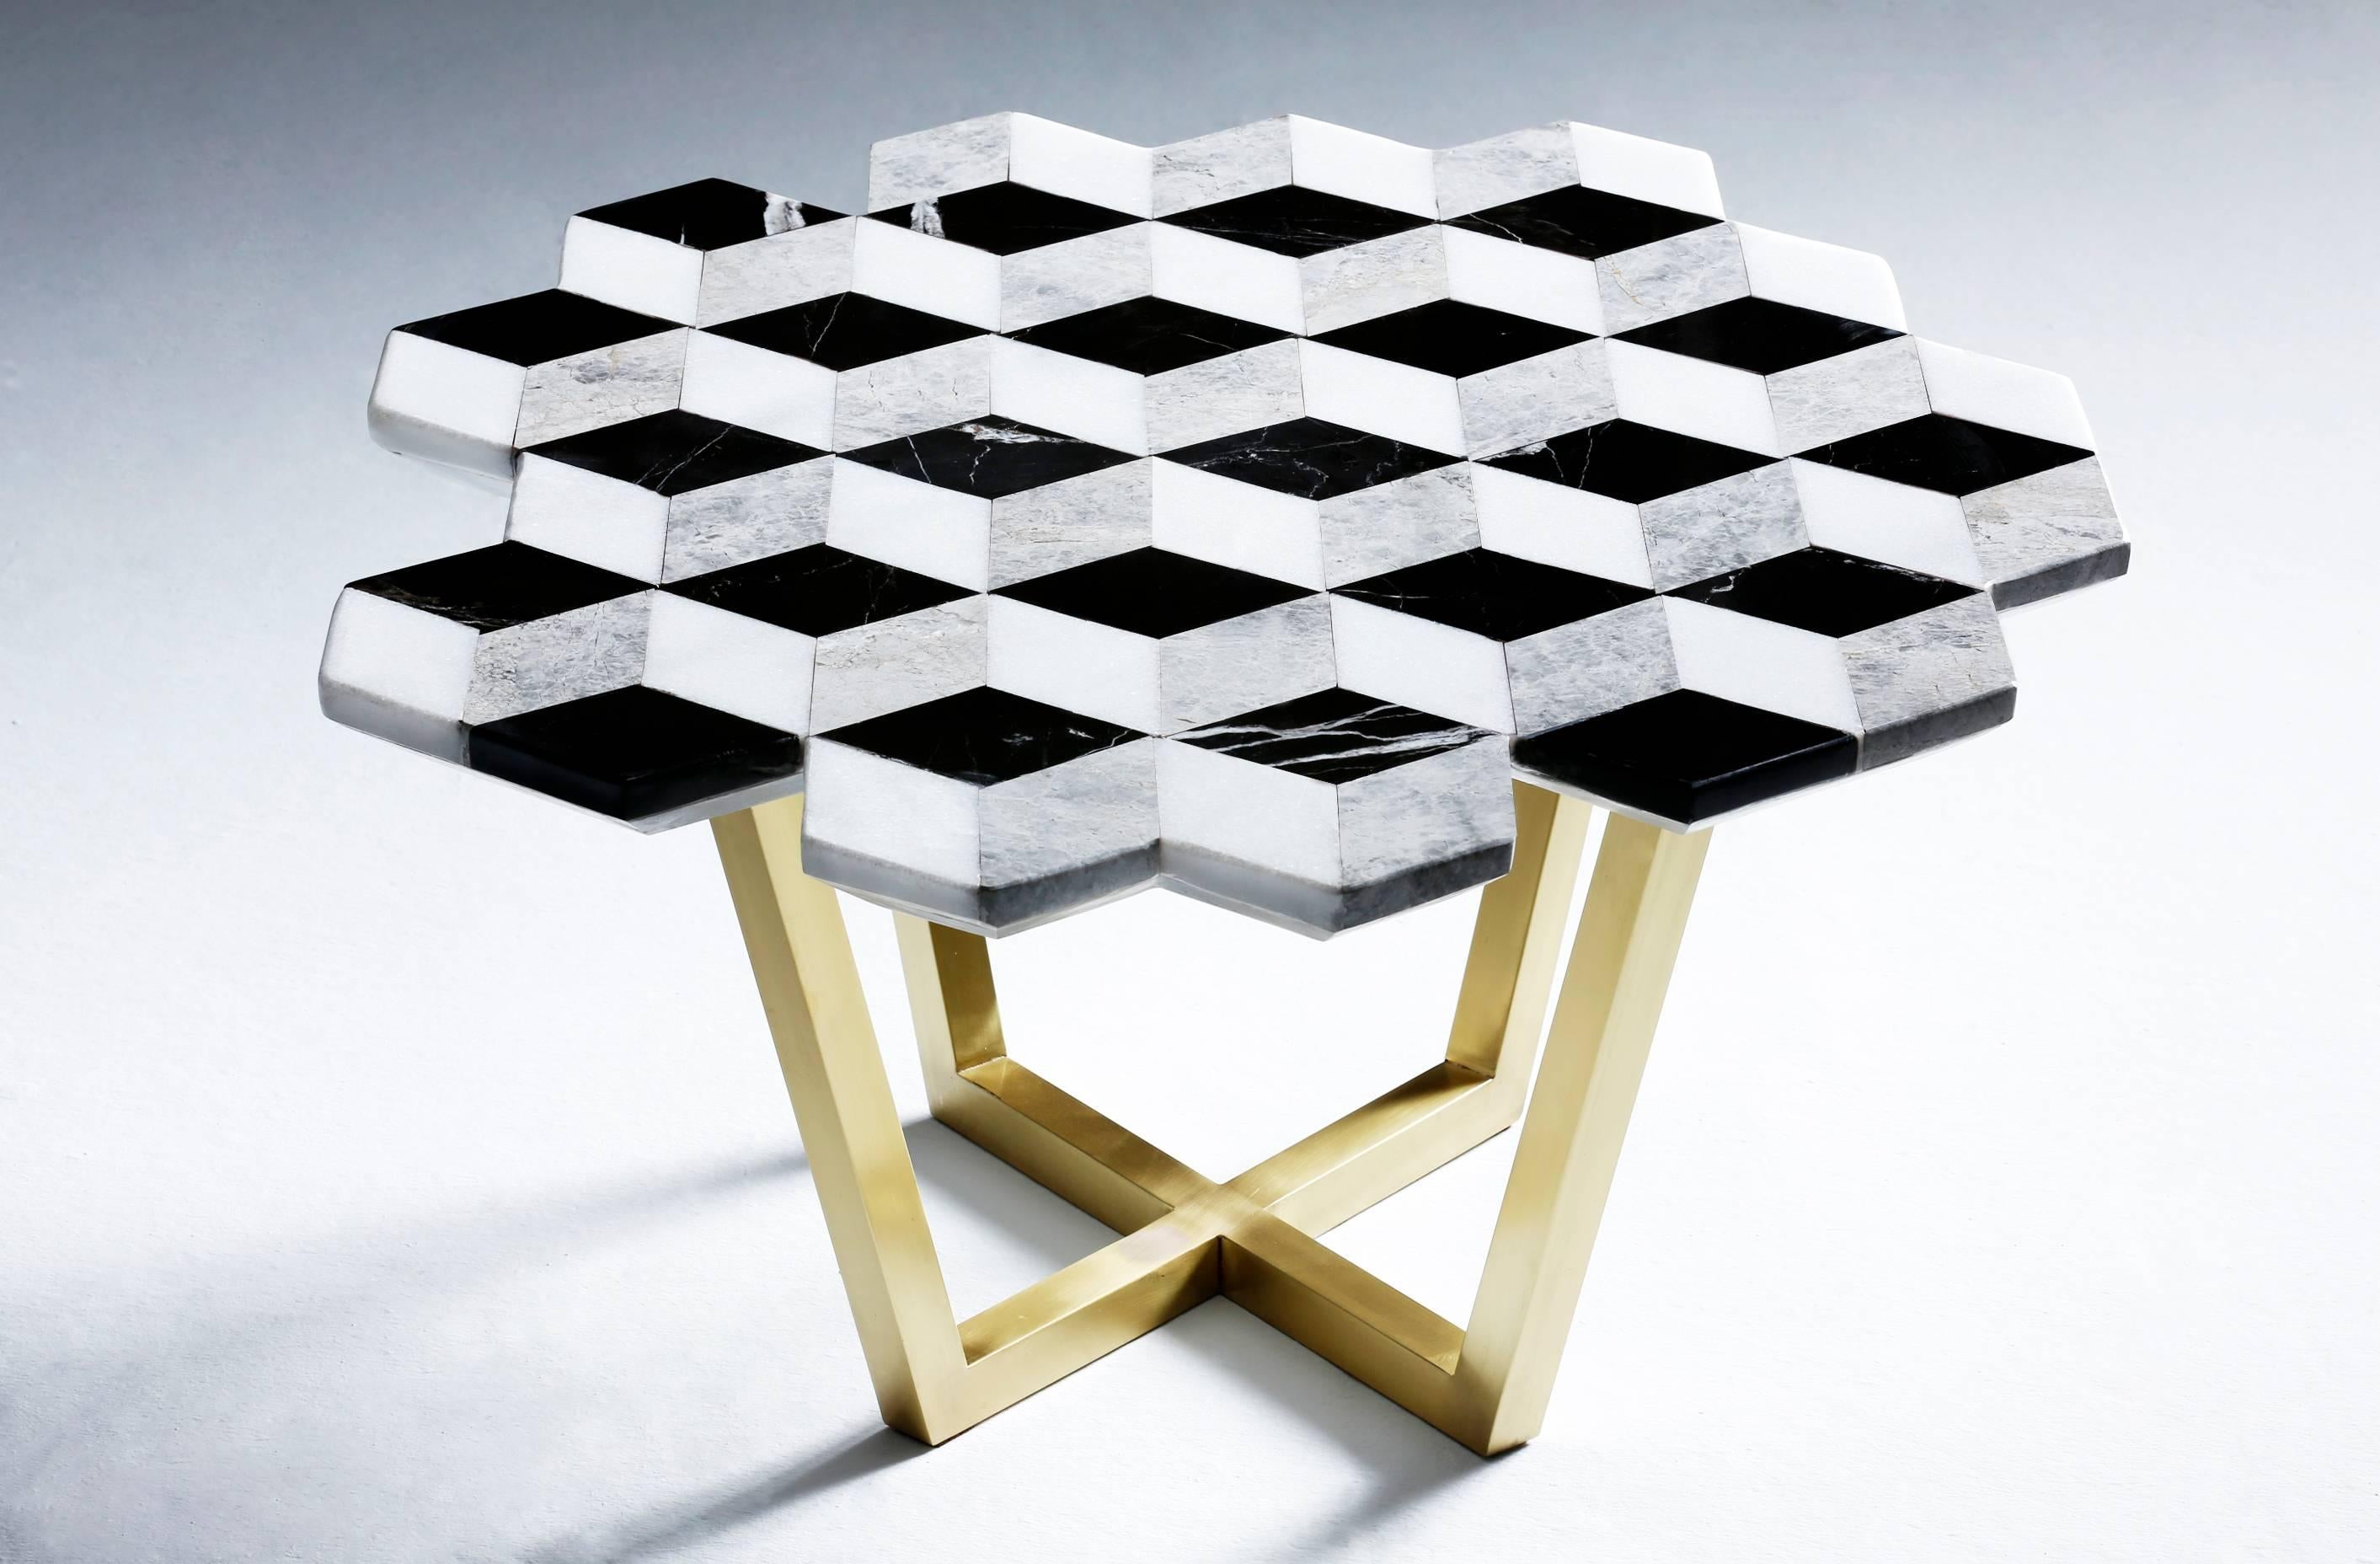 The Diplopia coffee table was conceived from the idea of creating an object that conveys an optical illusion. The stereographic effect is produced through combining different kinds of marble. The asymmetric form of the marble tabletop adds to the